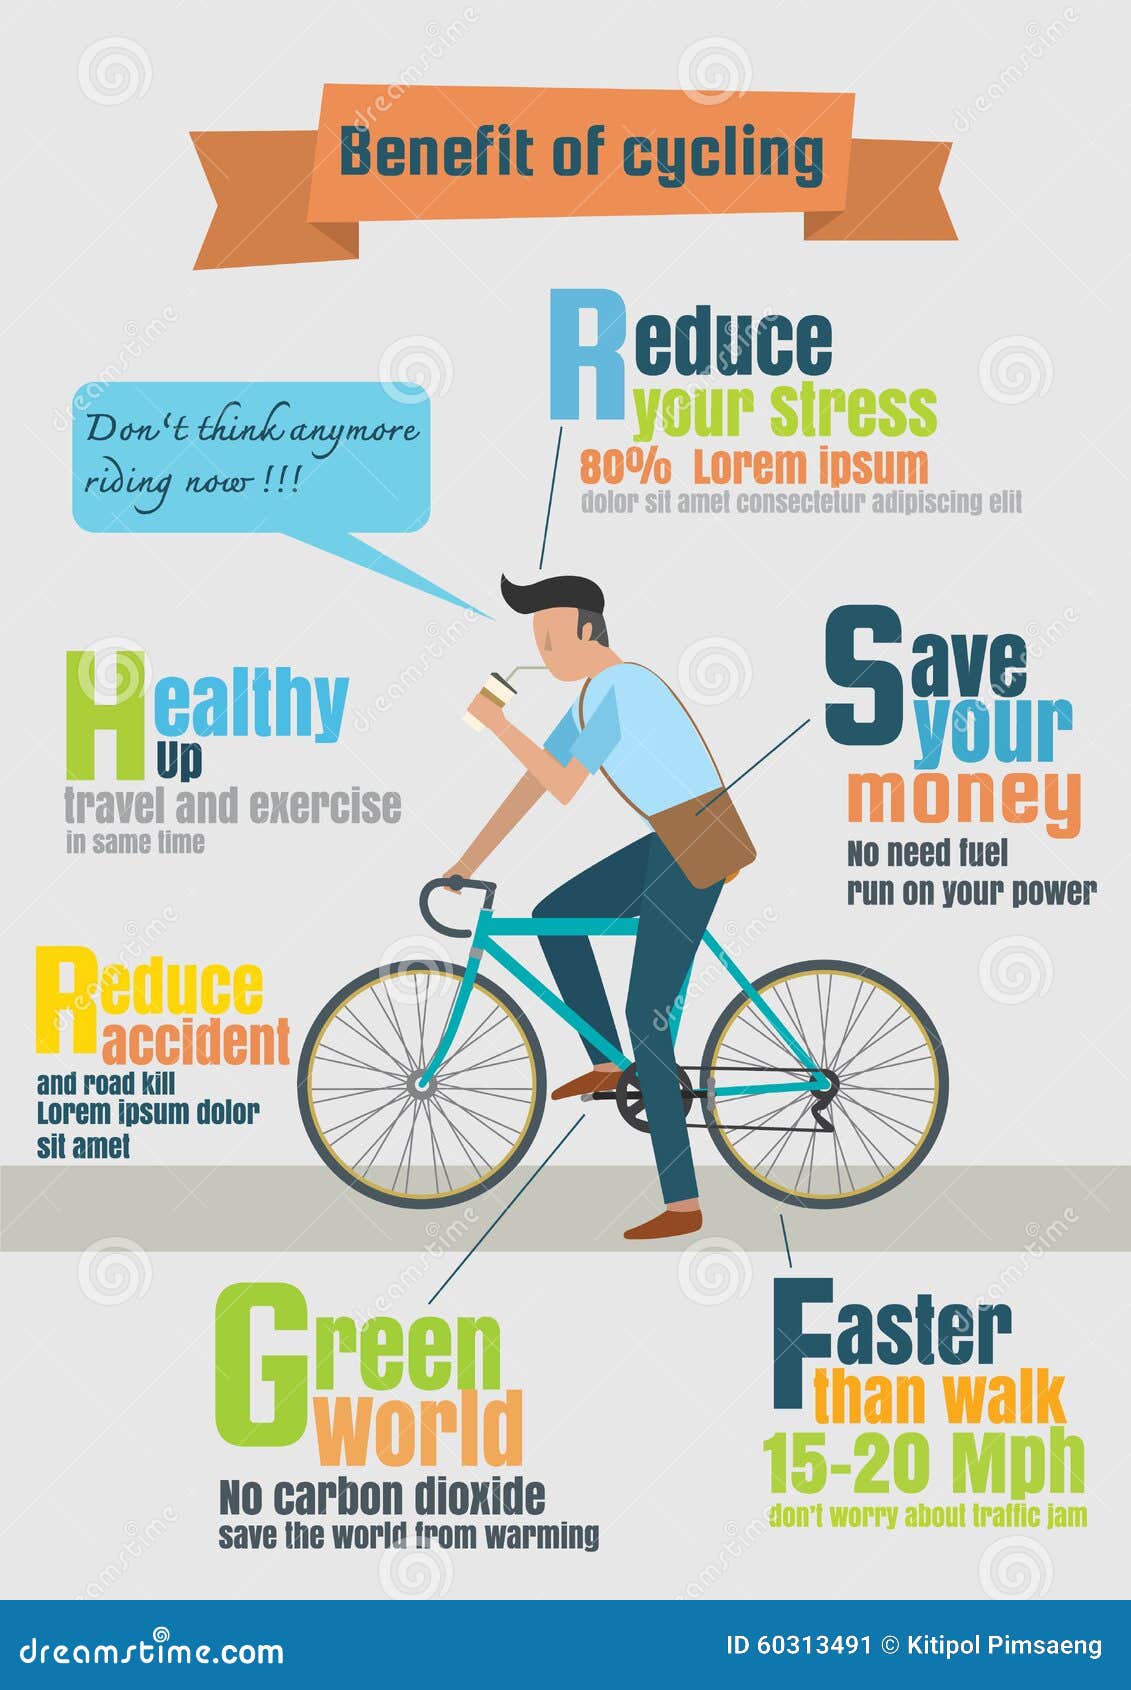 Infographic Of Bicycle Riderbenefit Of Cycling Stock Illustration inside The Most Stylish in addition to Stunning cycling physical benefits with regard to Home